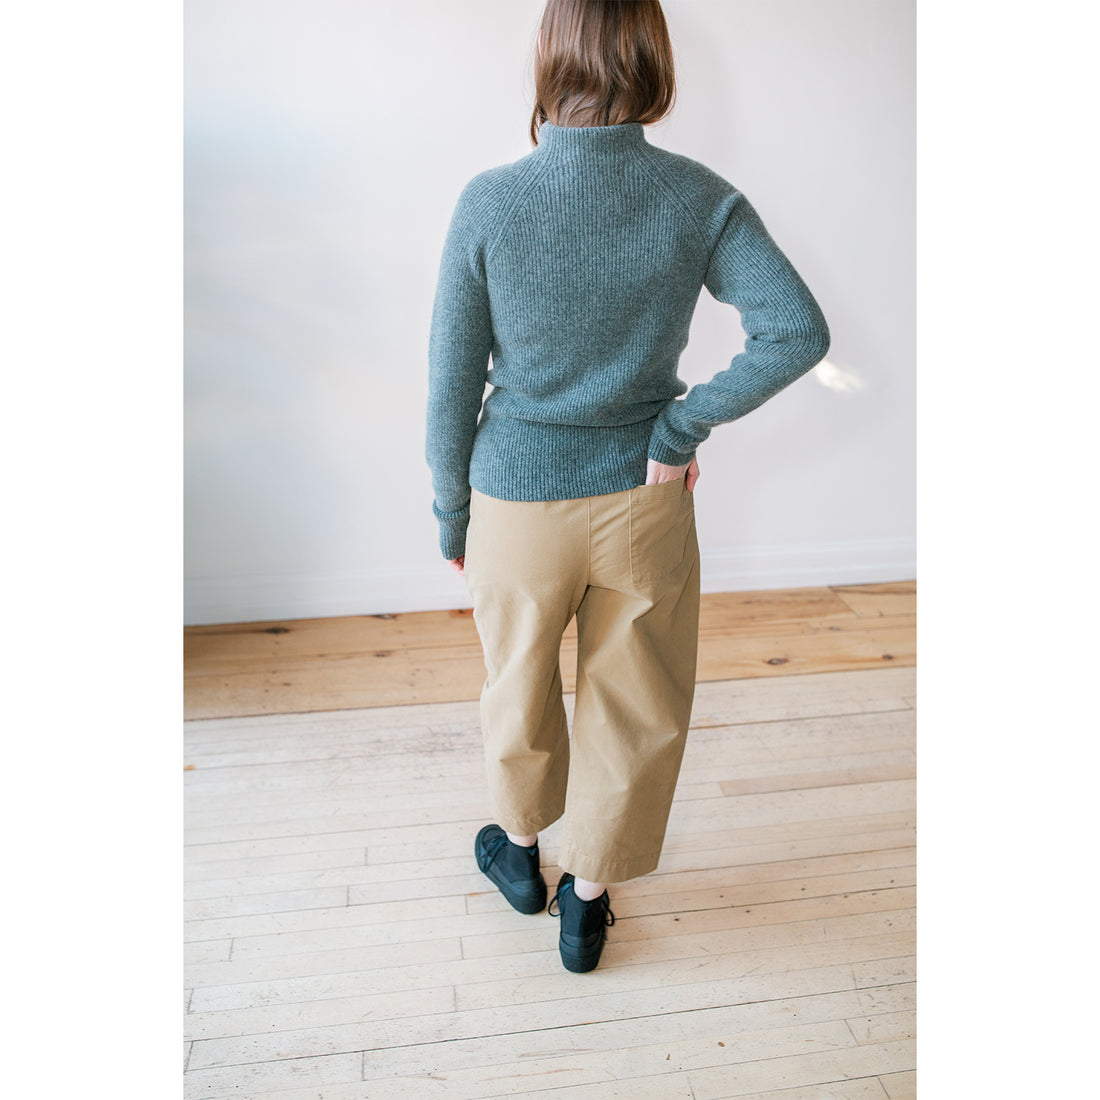 Grei Ovate Baggy Pant Twill in Khaki